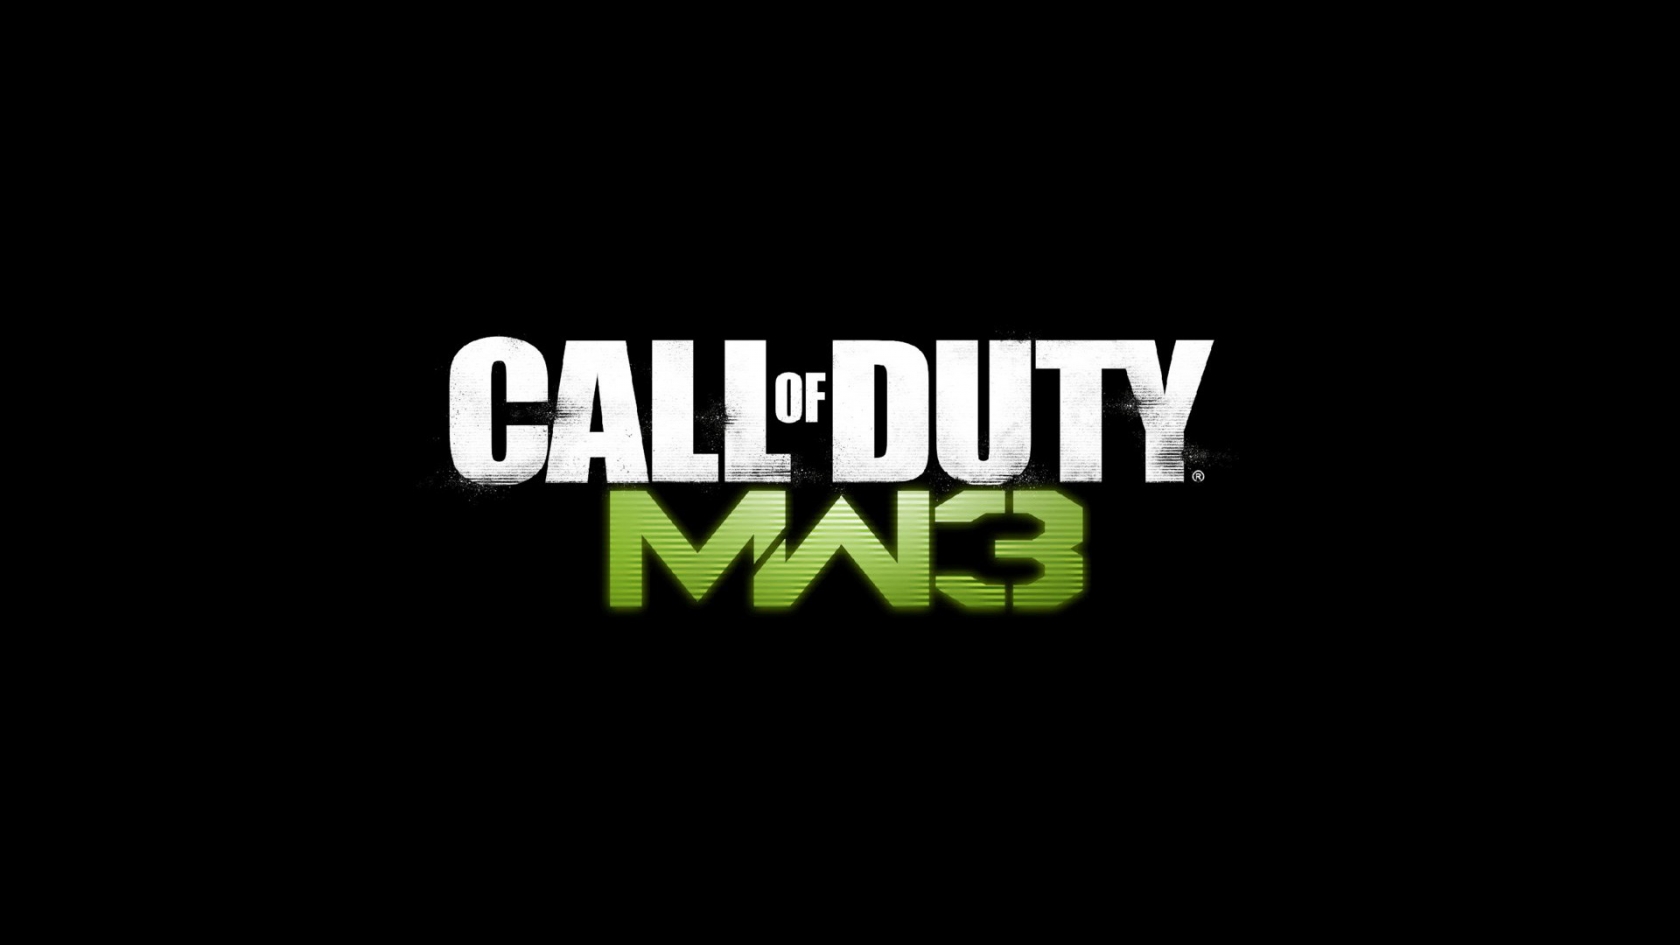 Call of Duty Modern Warfare 3 Game for 1680 x 945 HDTV resolution